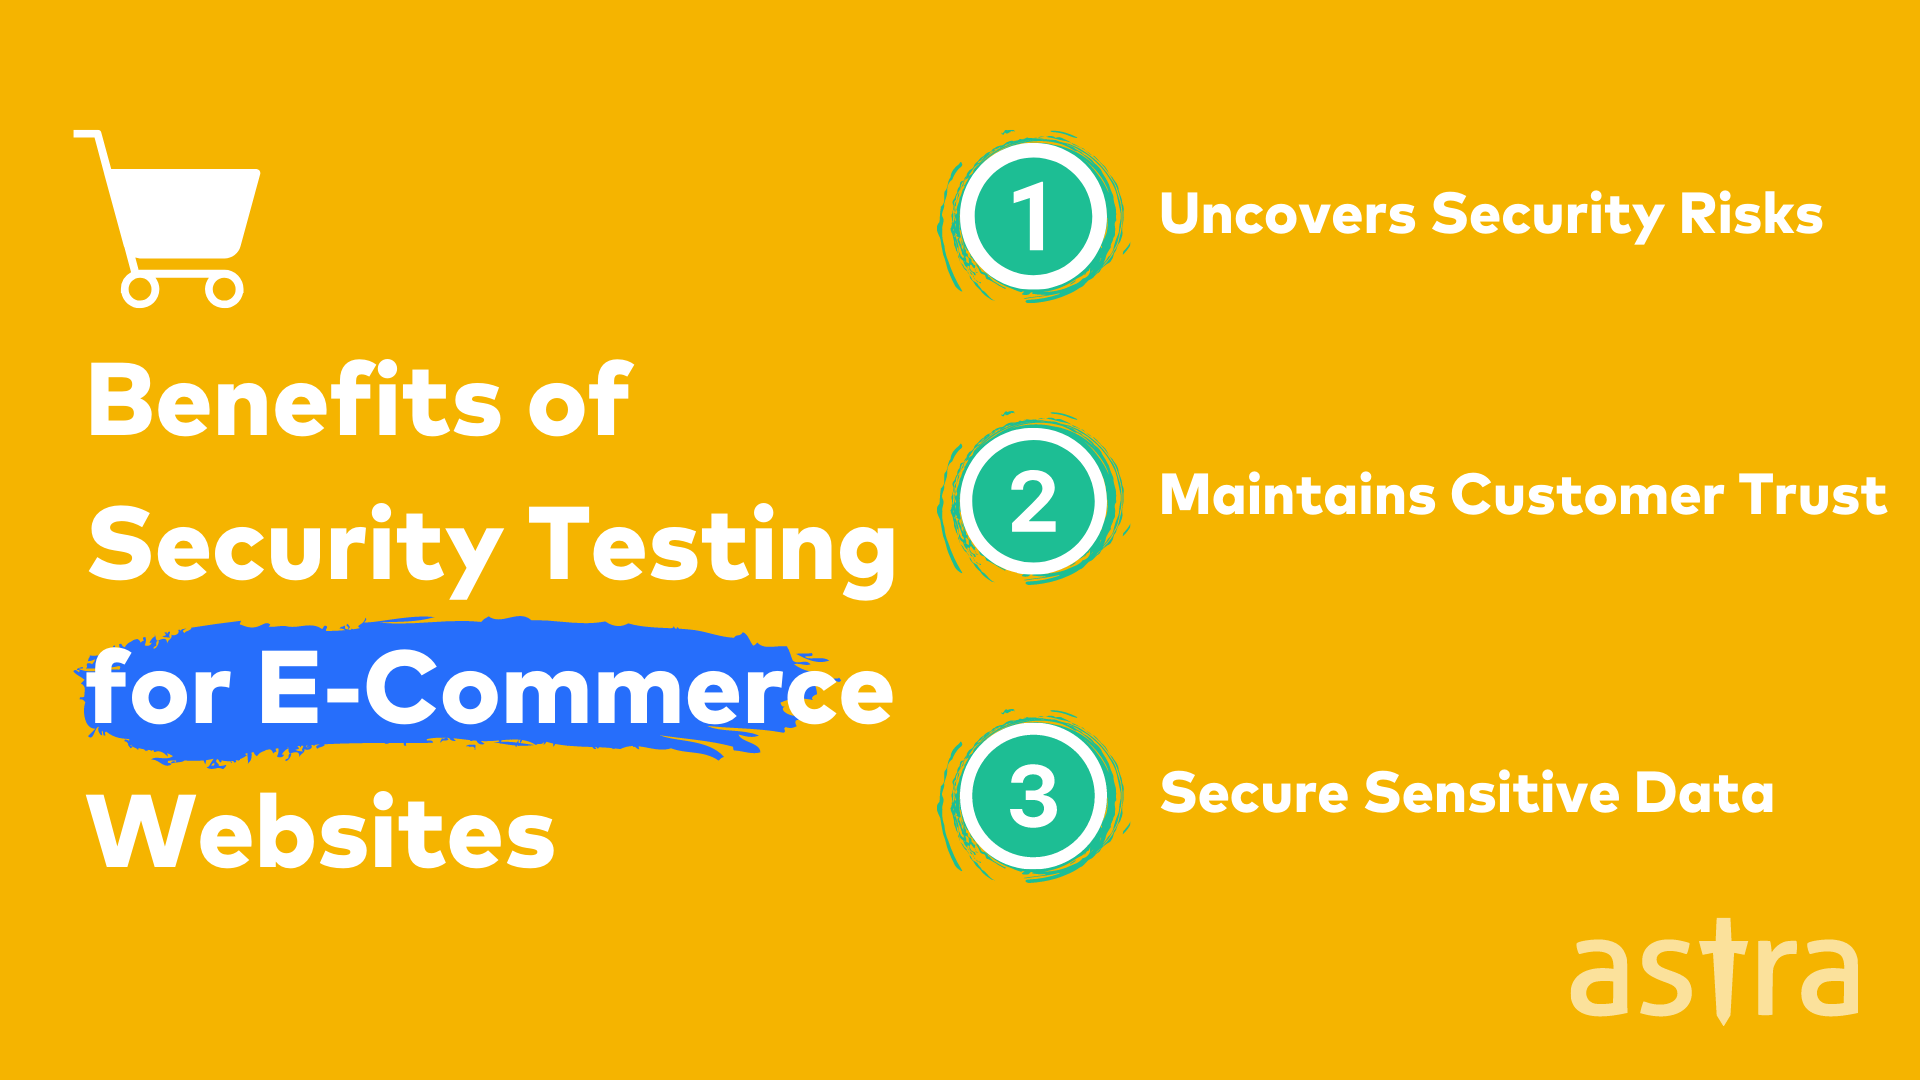 Why Security Testing for E-Commerce Websites is important?